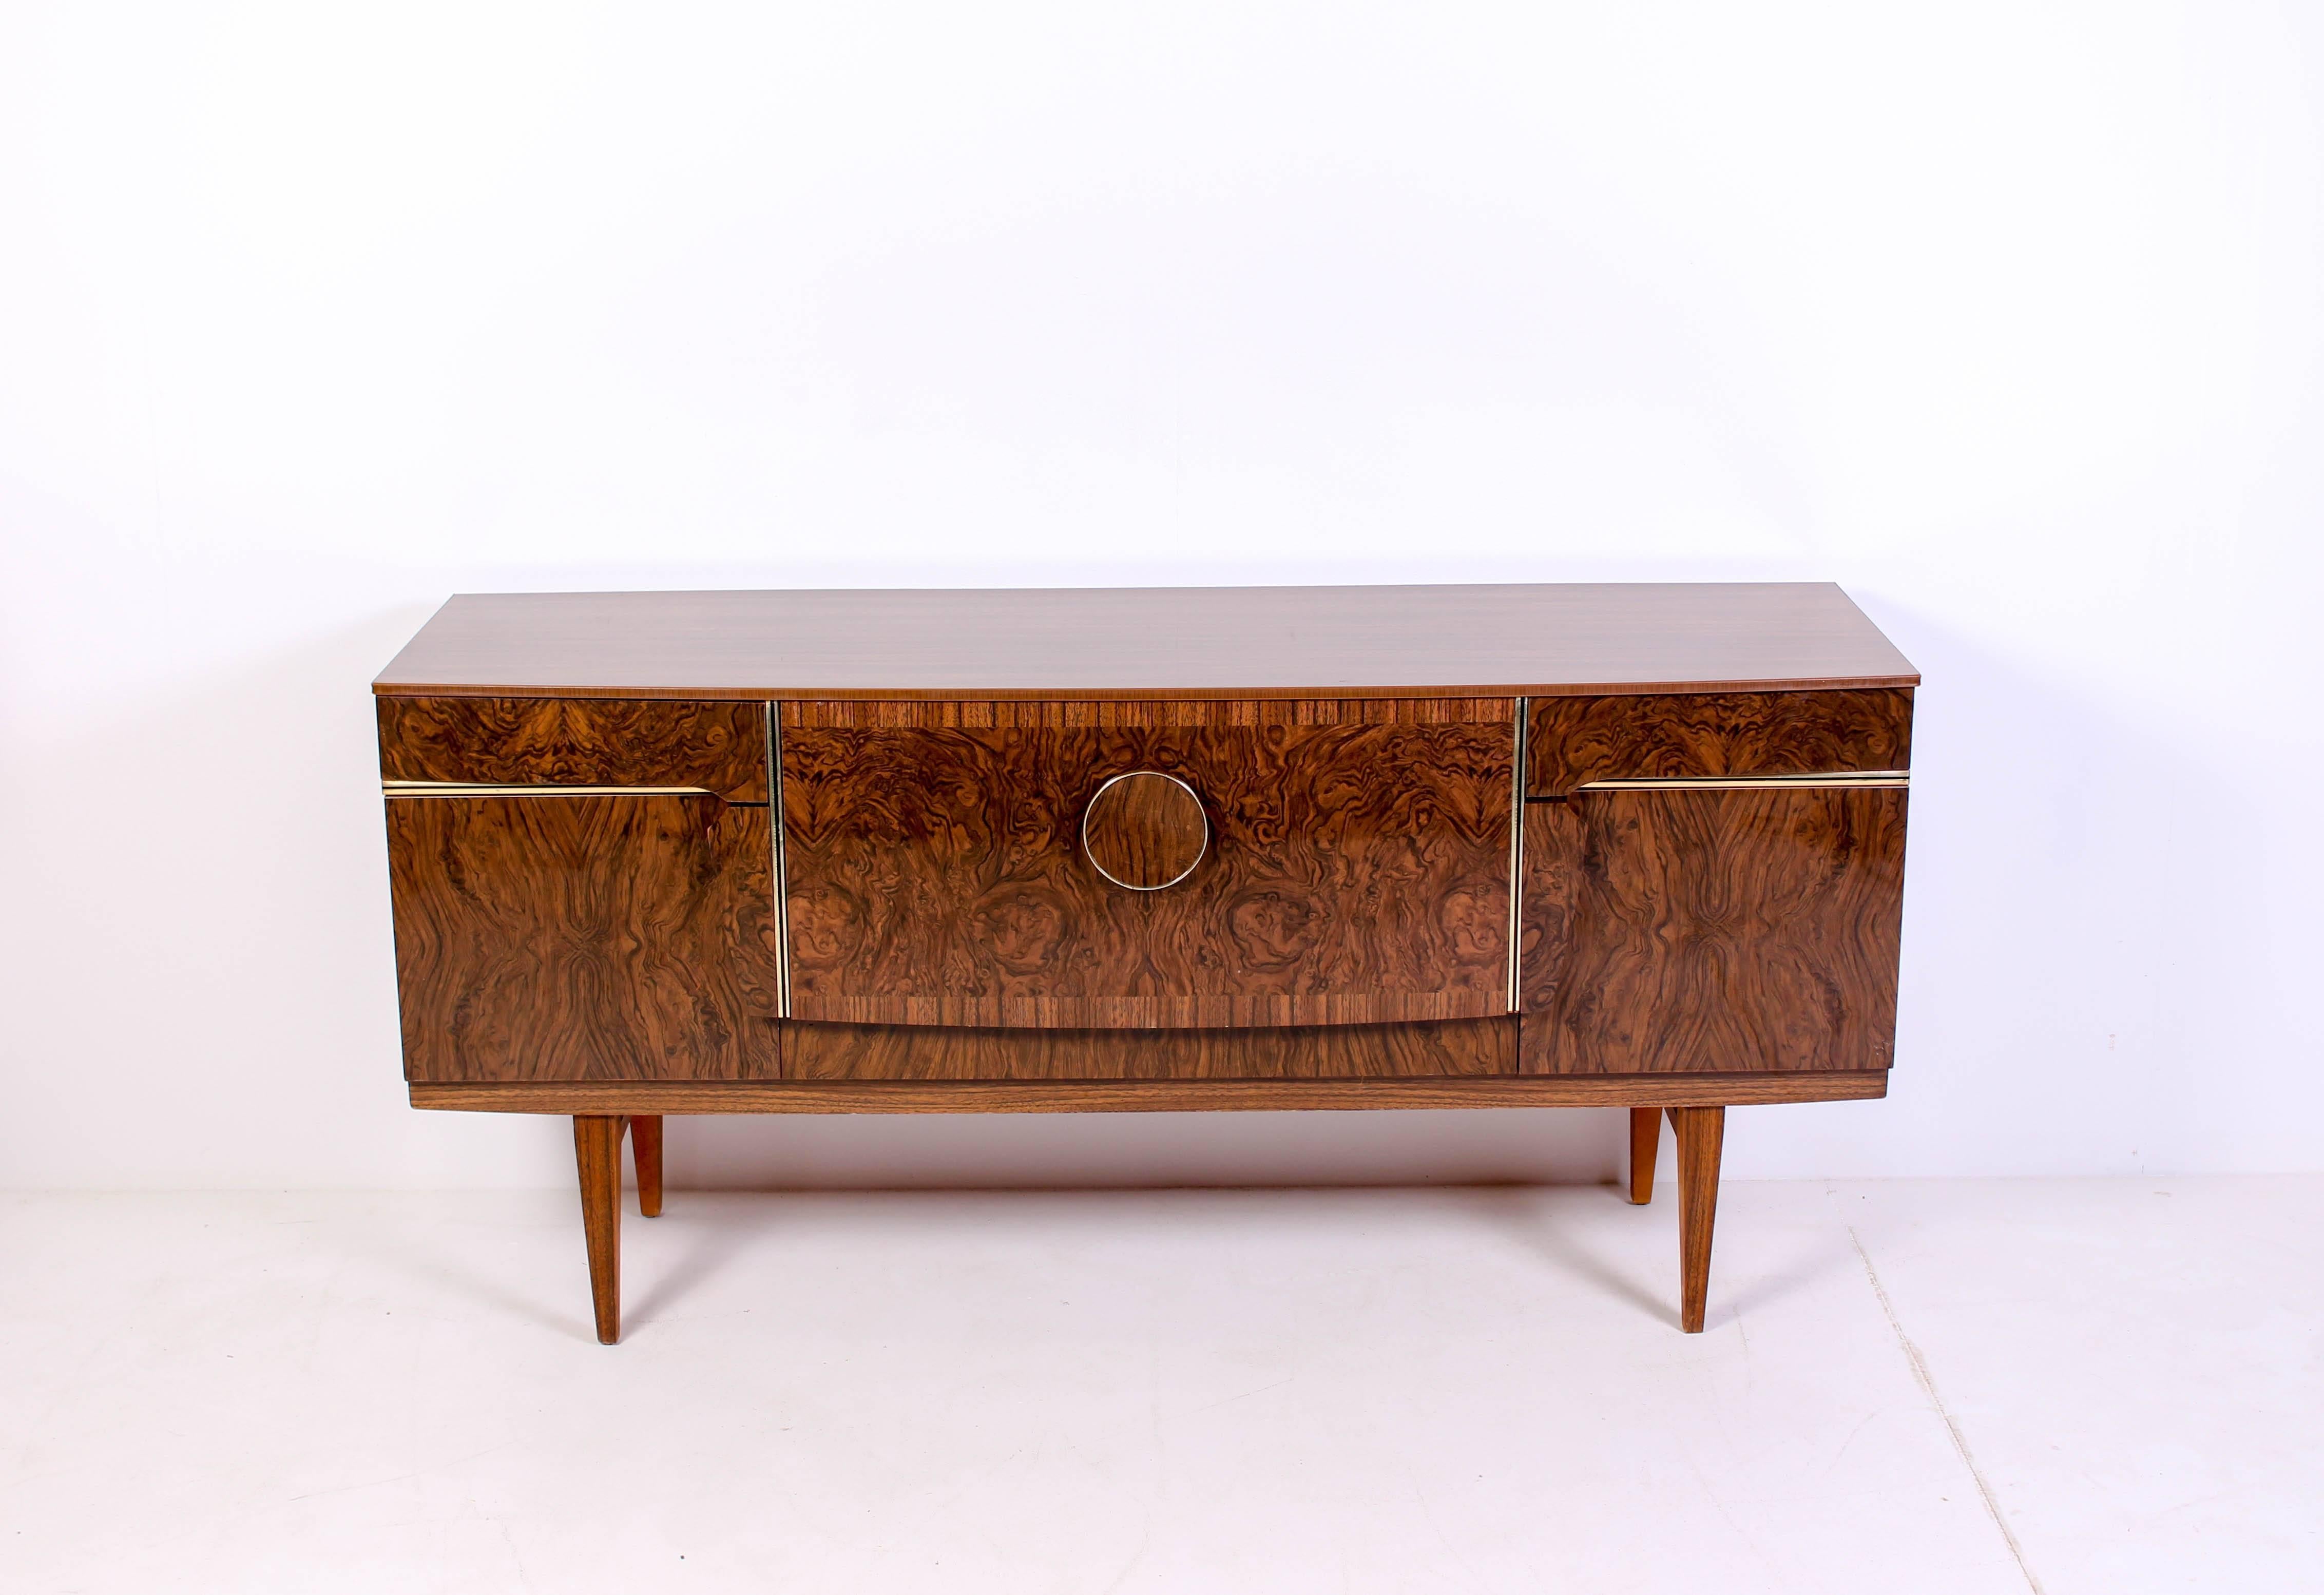 Midcentury Scandinavian sideboard by unknown designer. The sideboard (credenza) has a bar with built-in lightning. The sideboard also have brass details and beautifully shaped handles. 

Very good vintage condition with signs of usage consistent